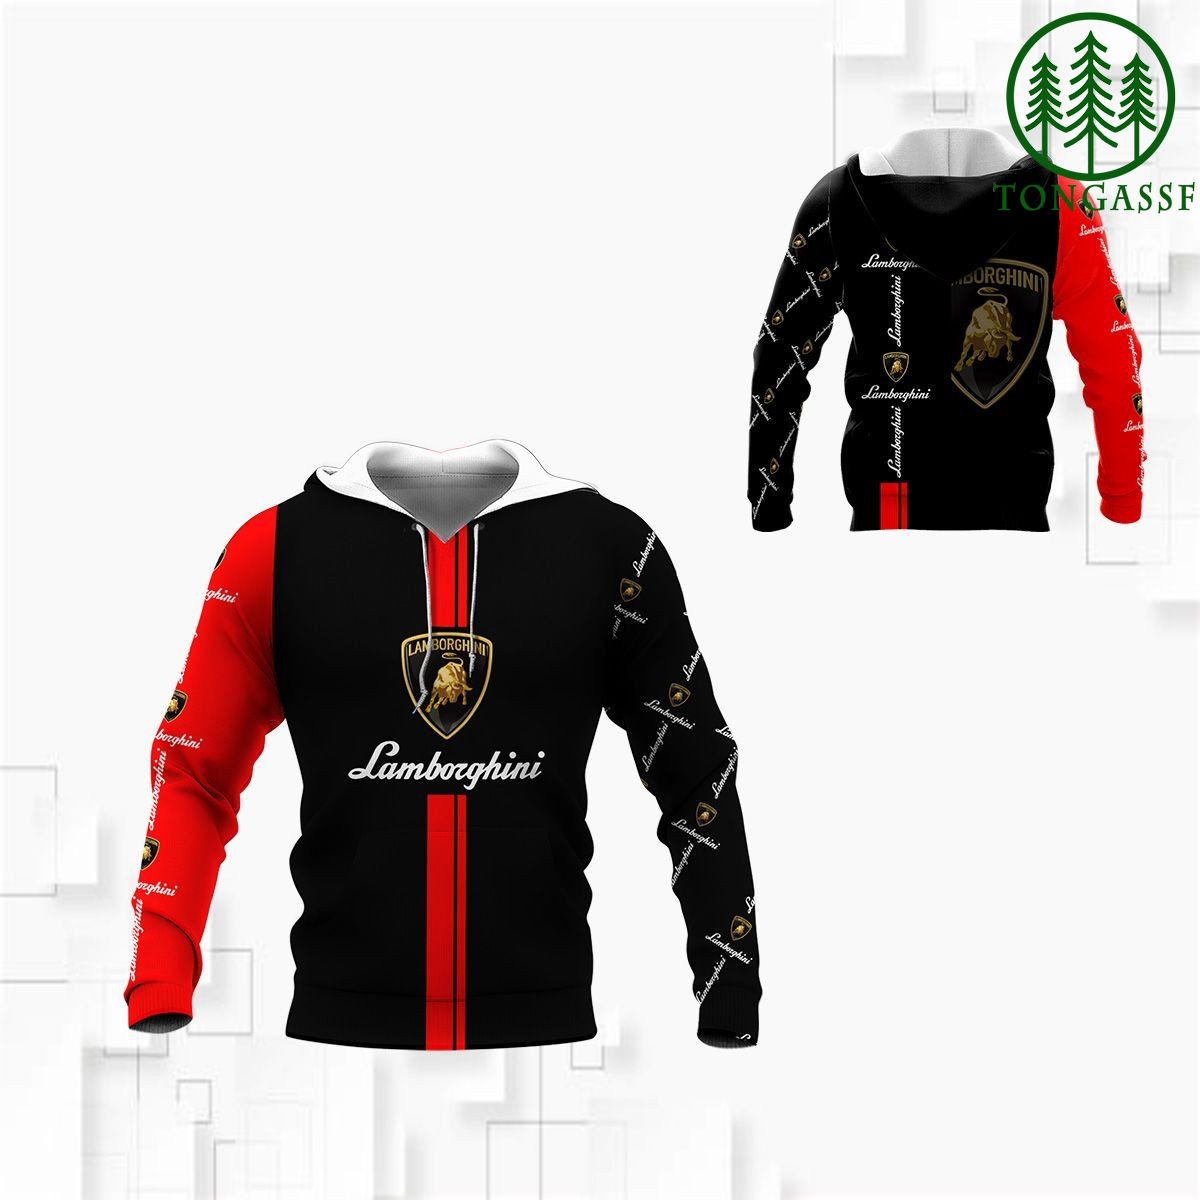 Lamborghini centered Logo with Red sleeve 3D Shirts